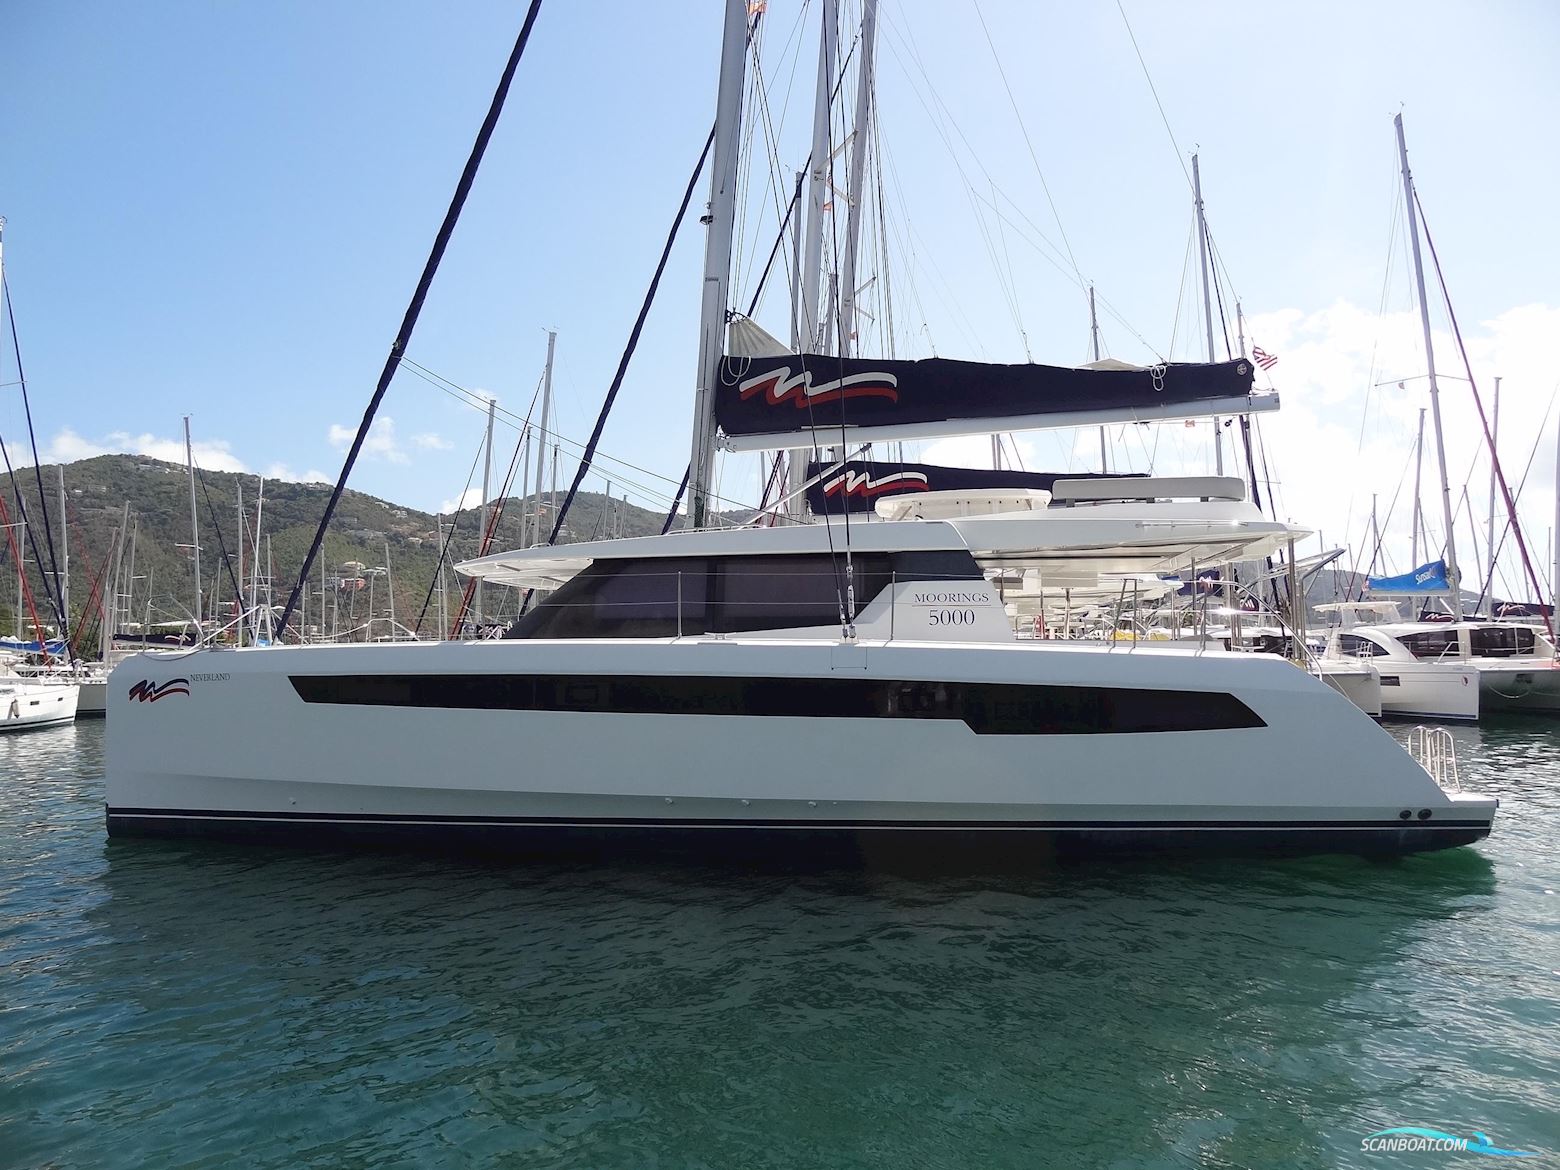 LEOPARD 50 Sailing boat 2019, with Yanmar engine, No country info